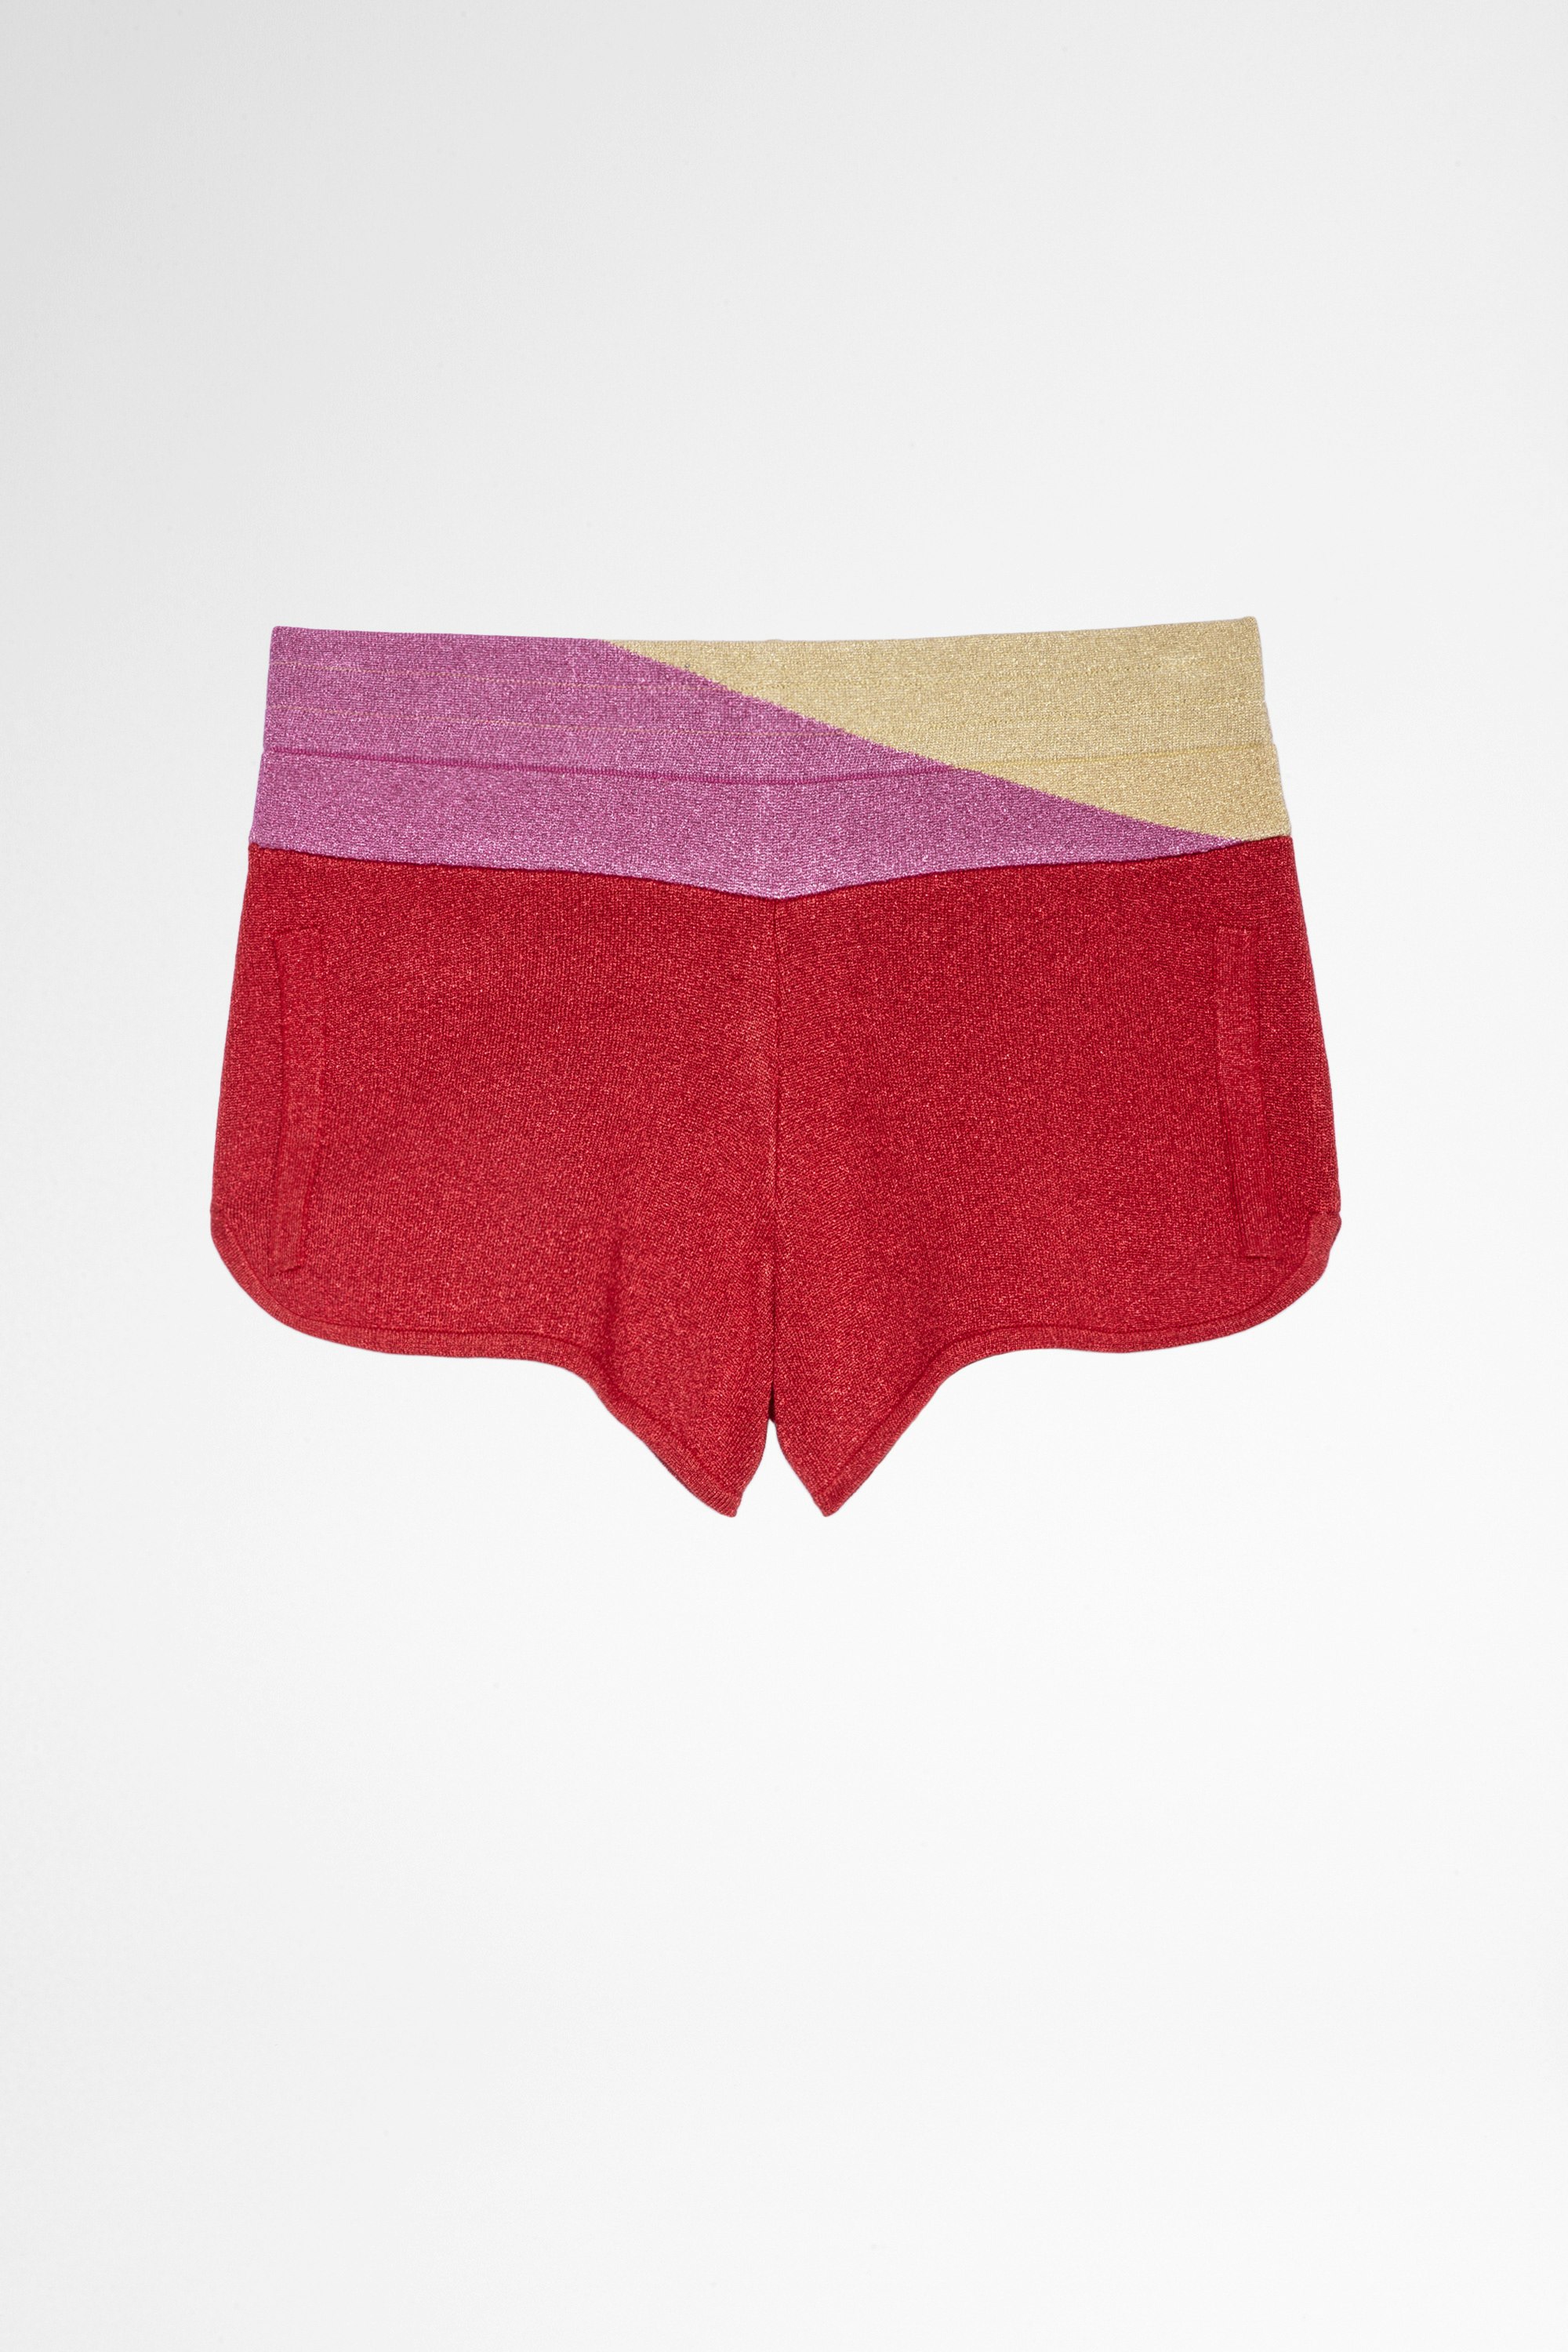 Smile Shorts Women's shorts with glittering red metallic thread